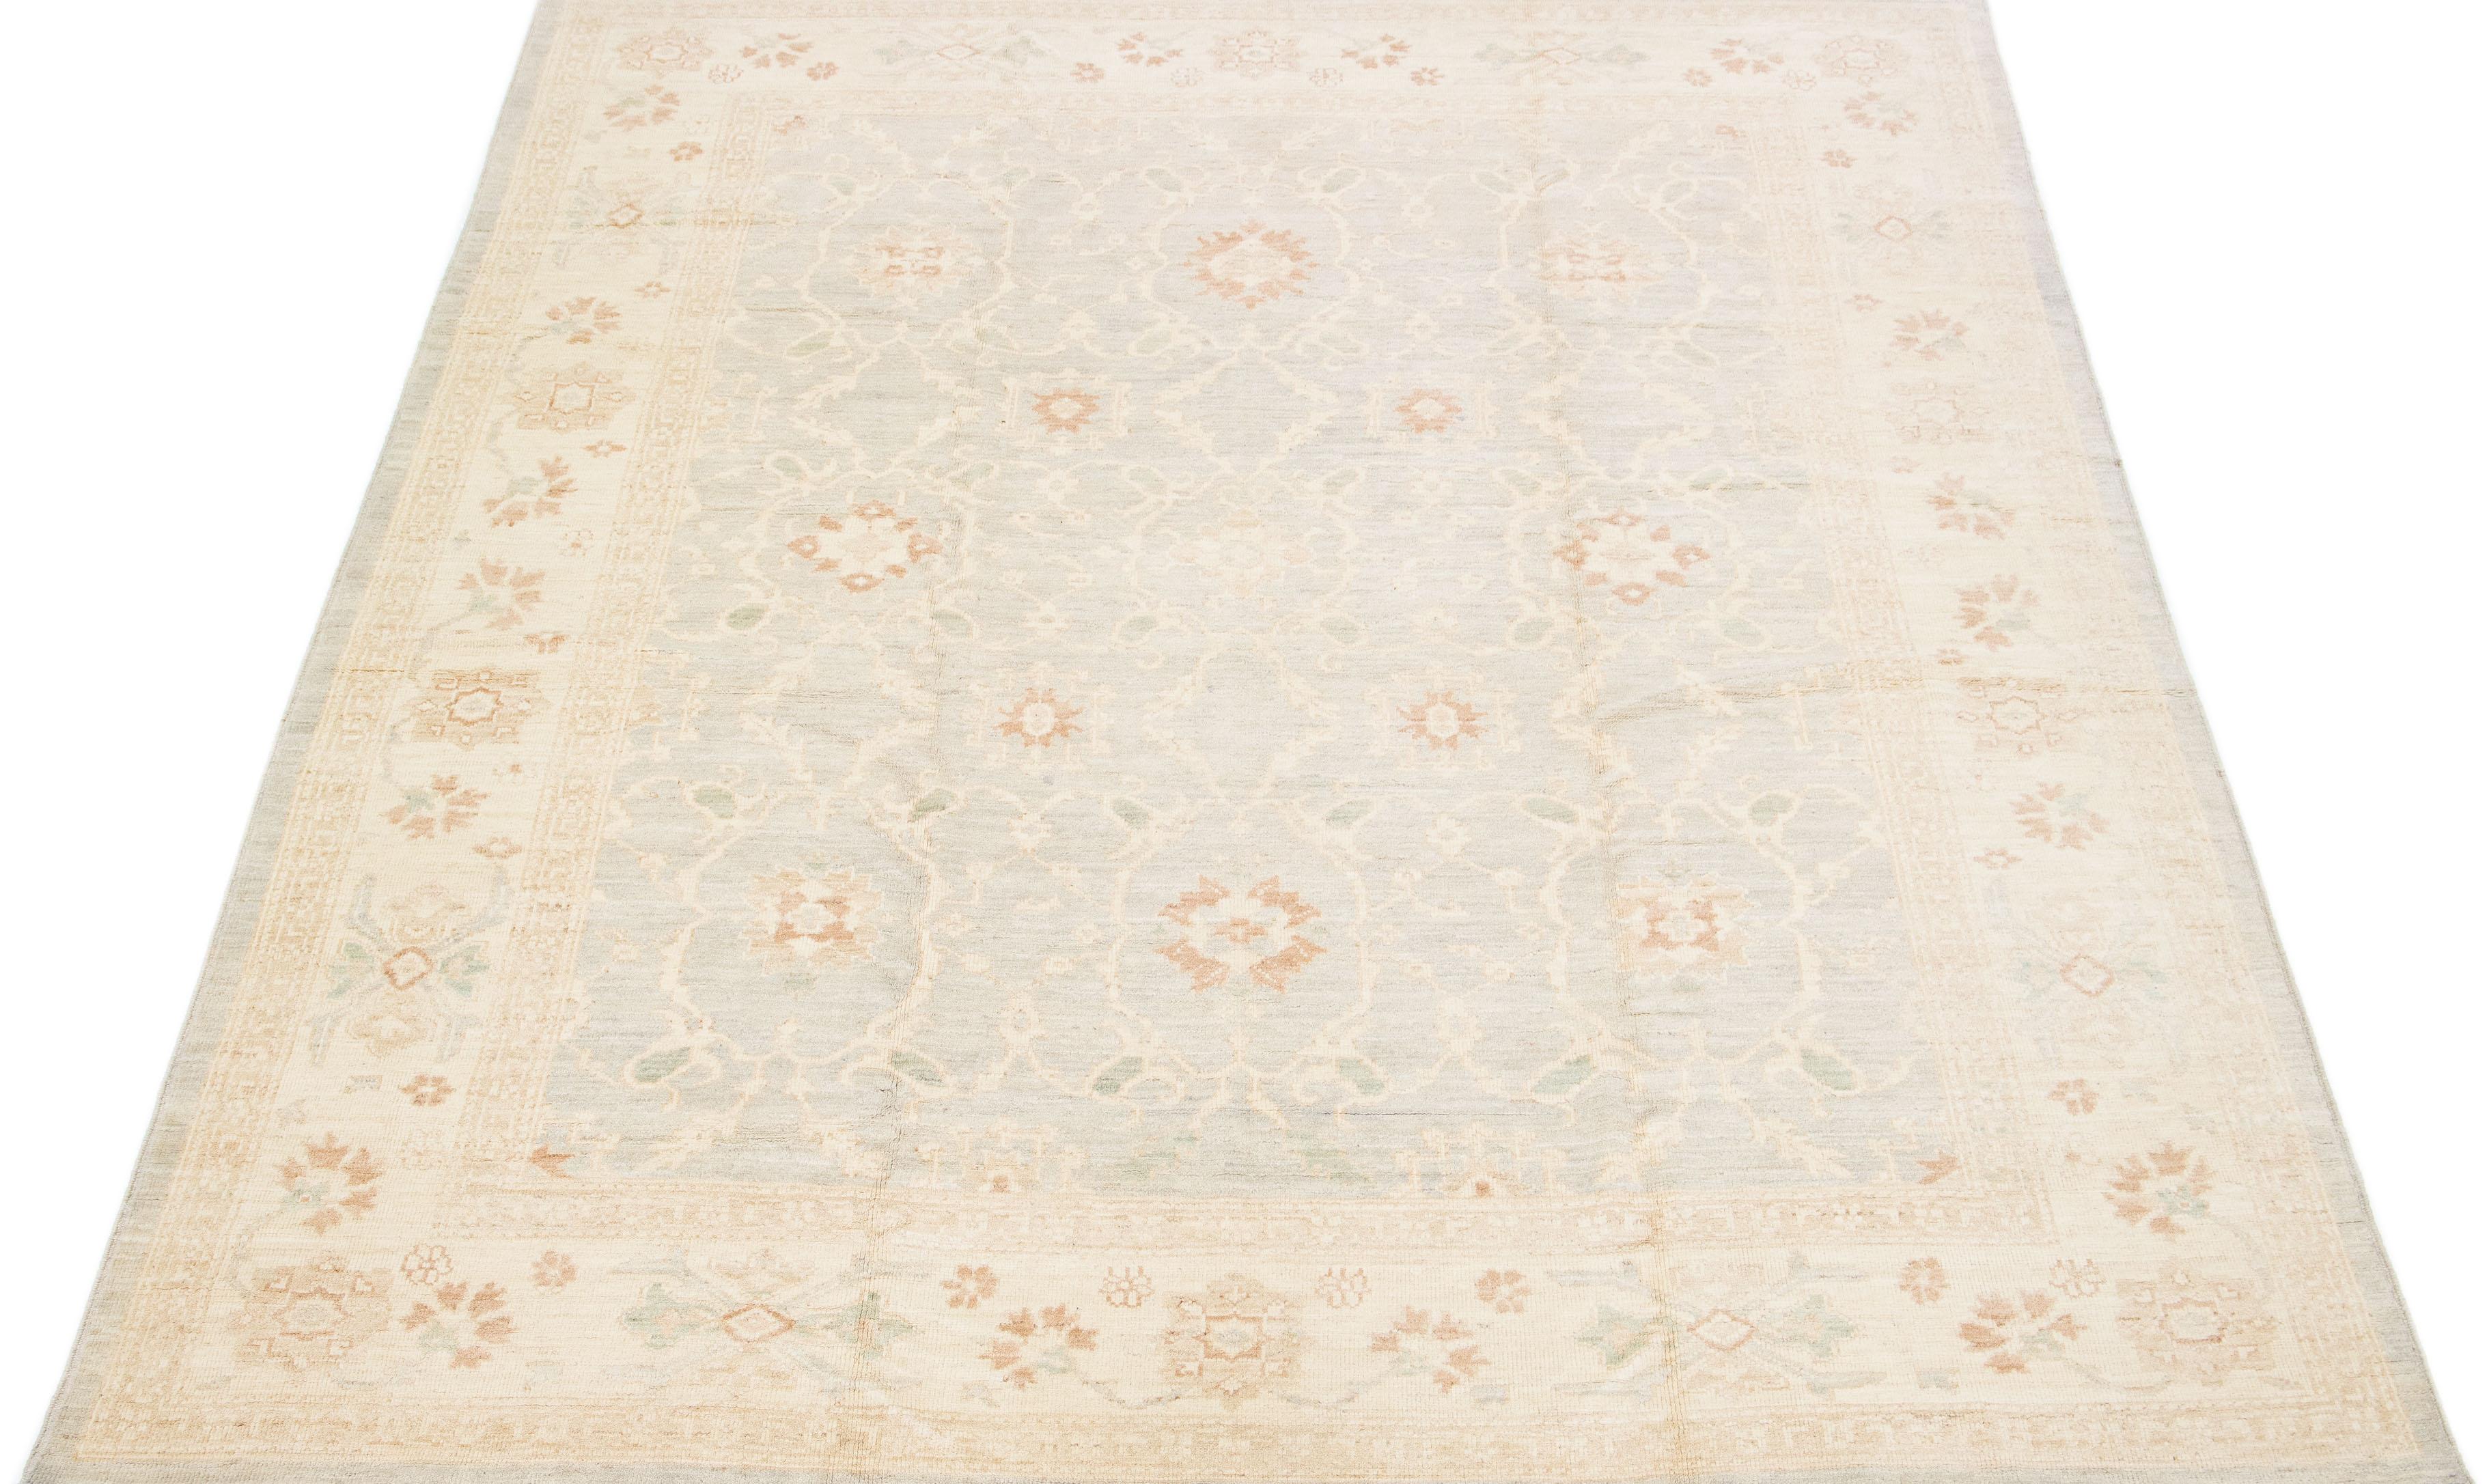 Beautiful modern Oushak hand-knotted wool rug with a gray color field. This Turkish Piece has beige, blue, and brown accent colors in a gorgeous all-over floral design.

This rug measures: 8'10